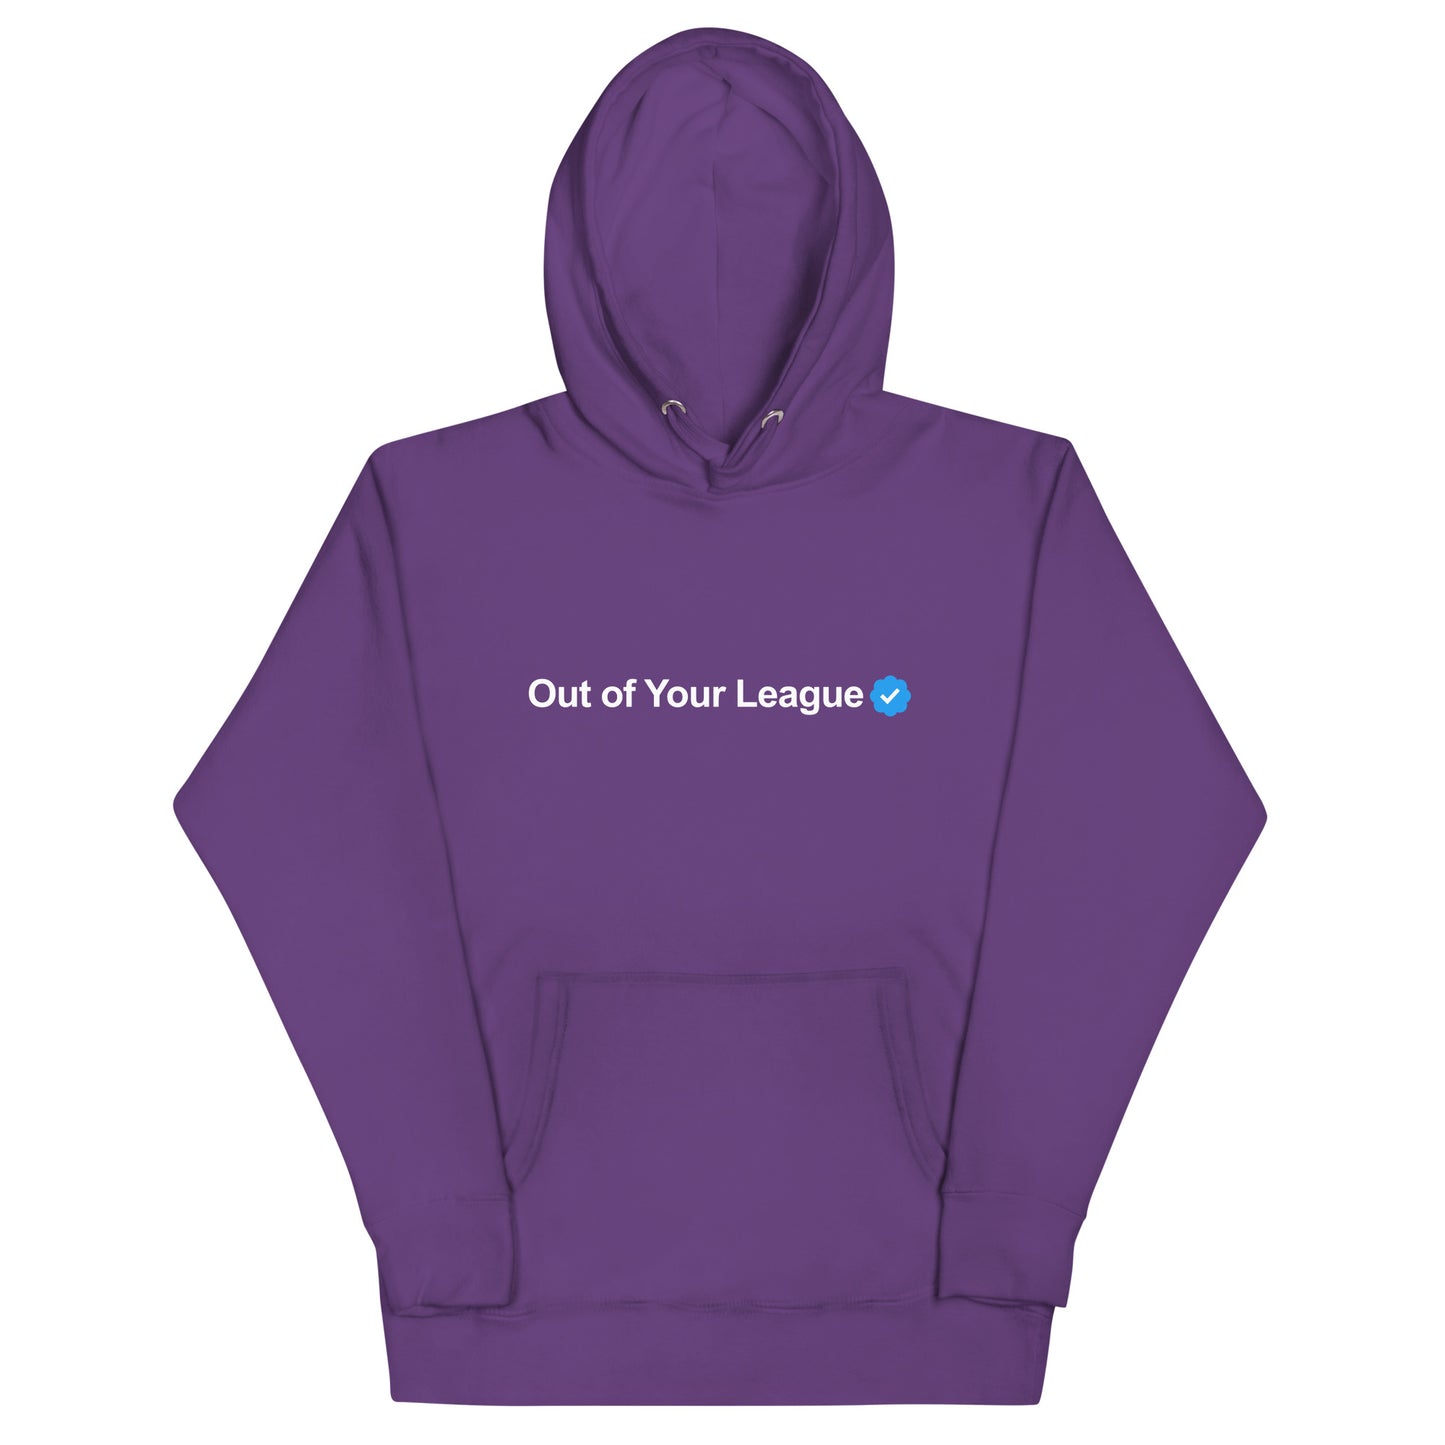 Out of Your League Unisex Hoodie